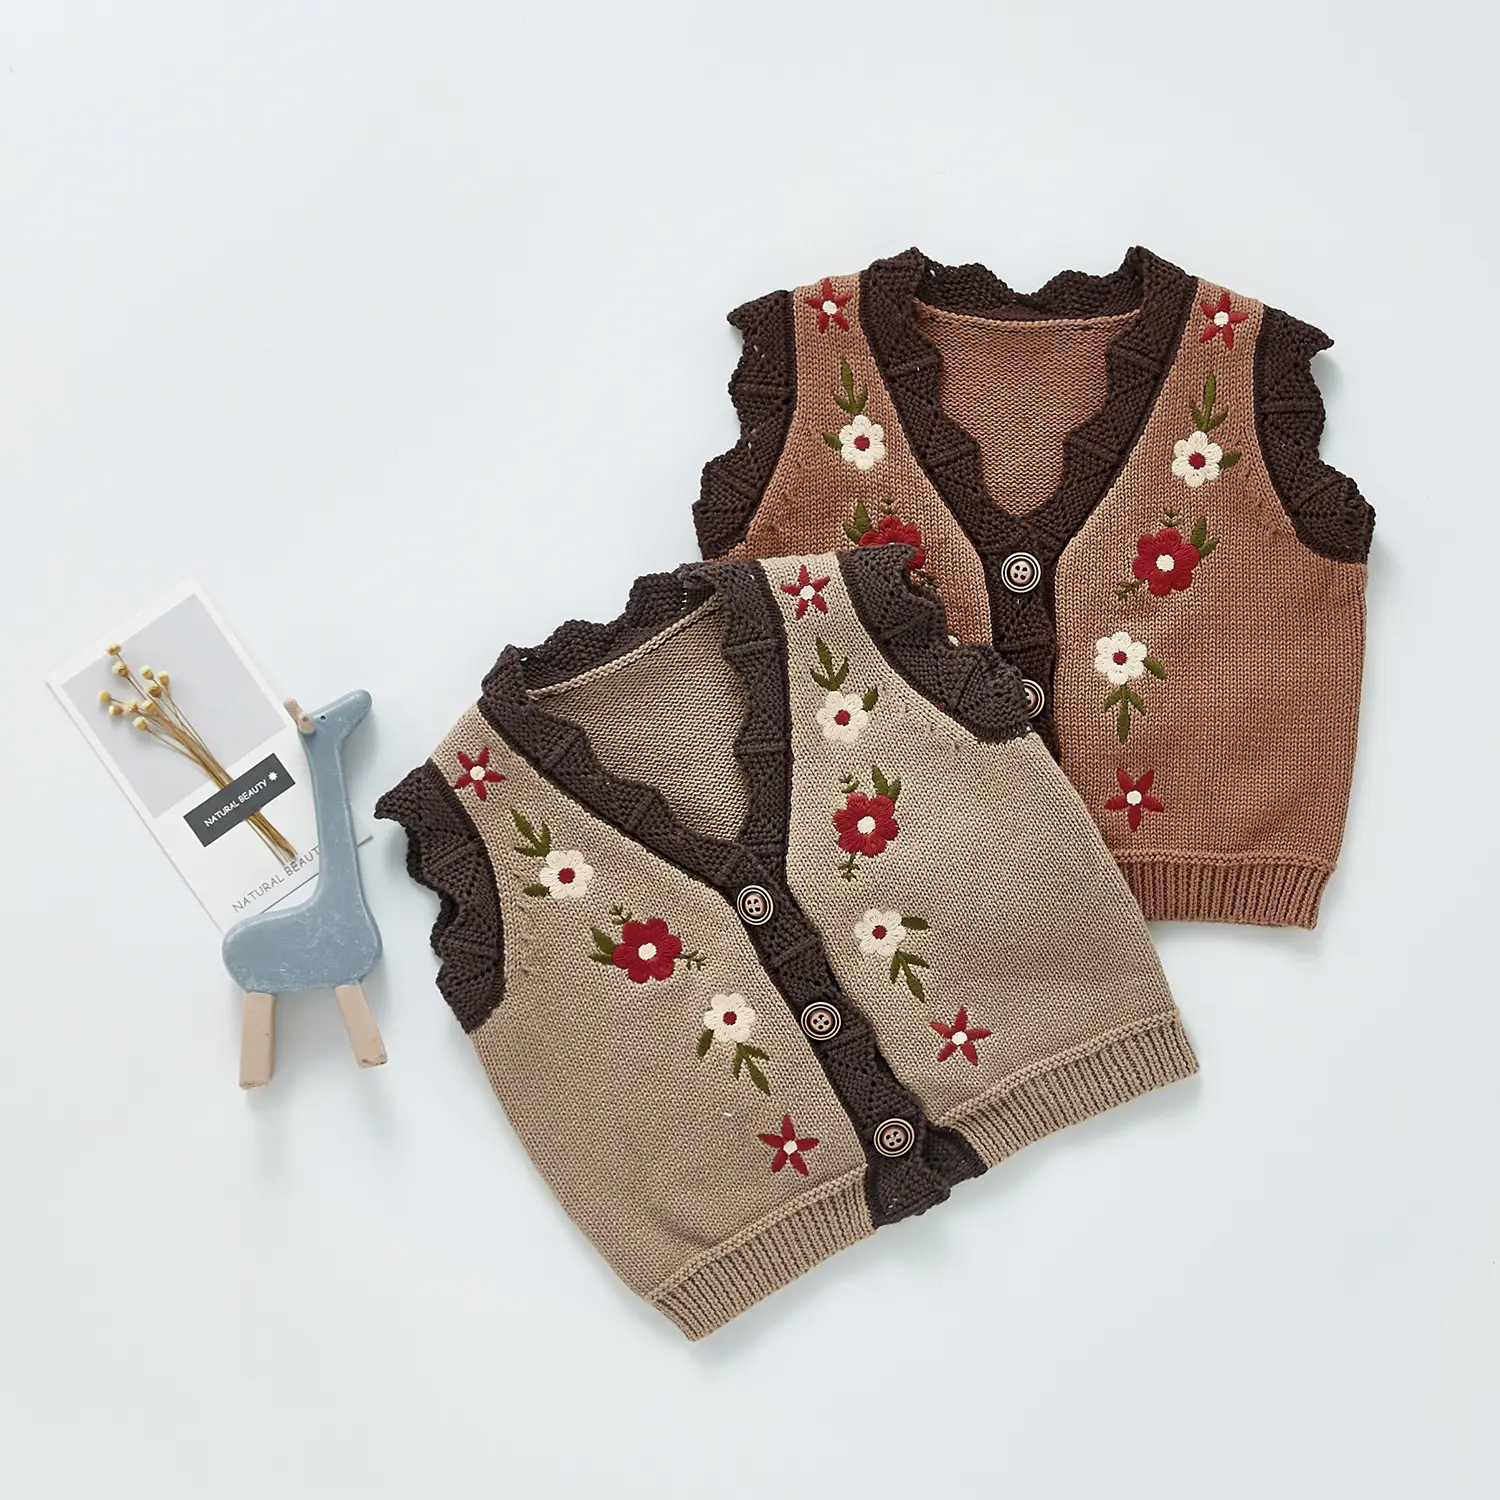 2021 New Baby Infant Girl Brown Knitted Vest mit Cute Flowers Fancy Cute Toddler Embroidery Sleeveless Sweater 0-3 Years